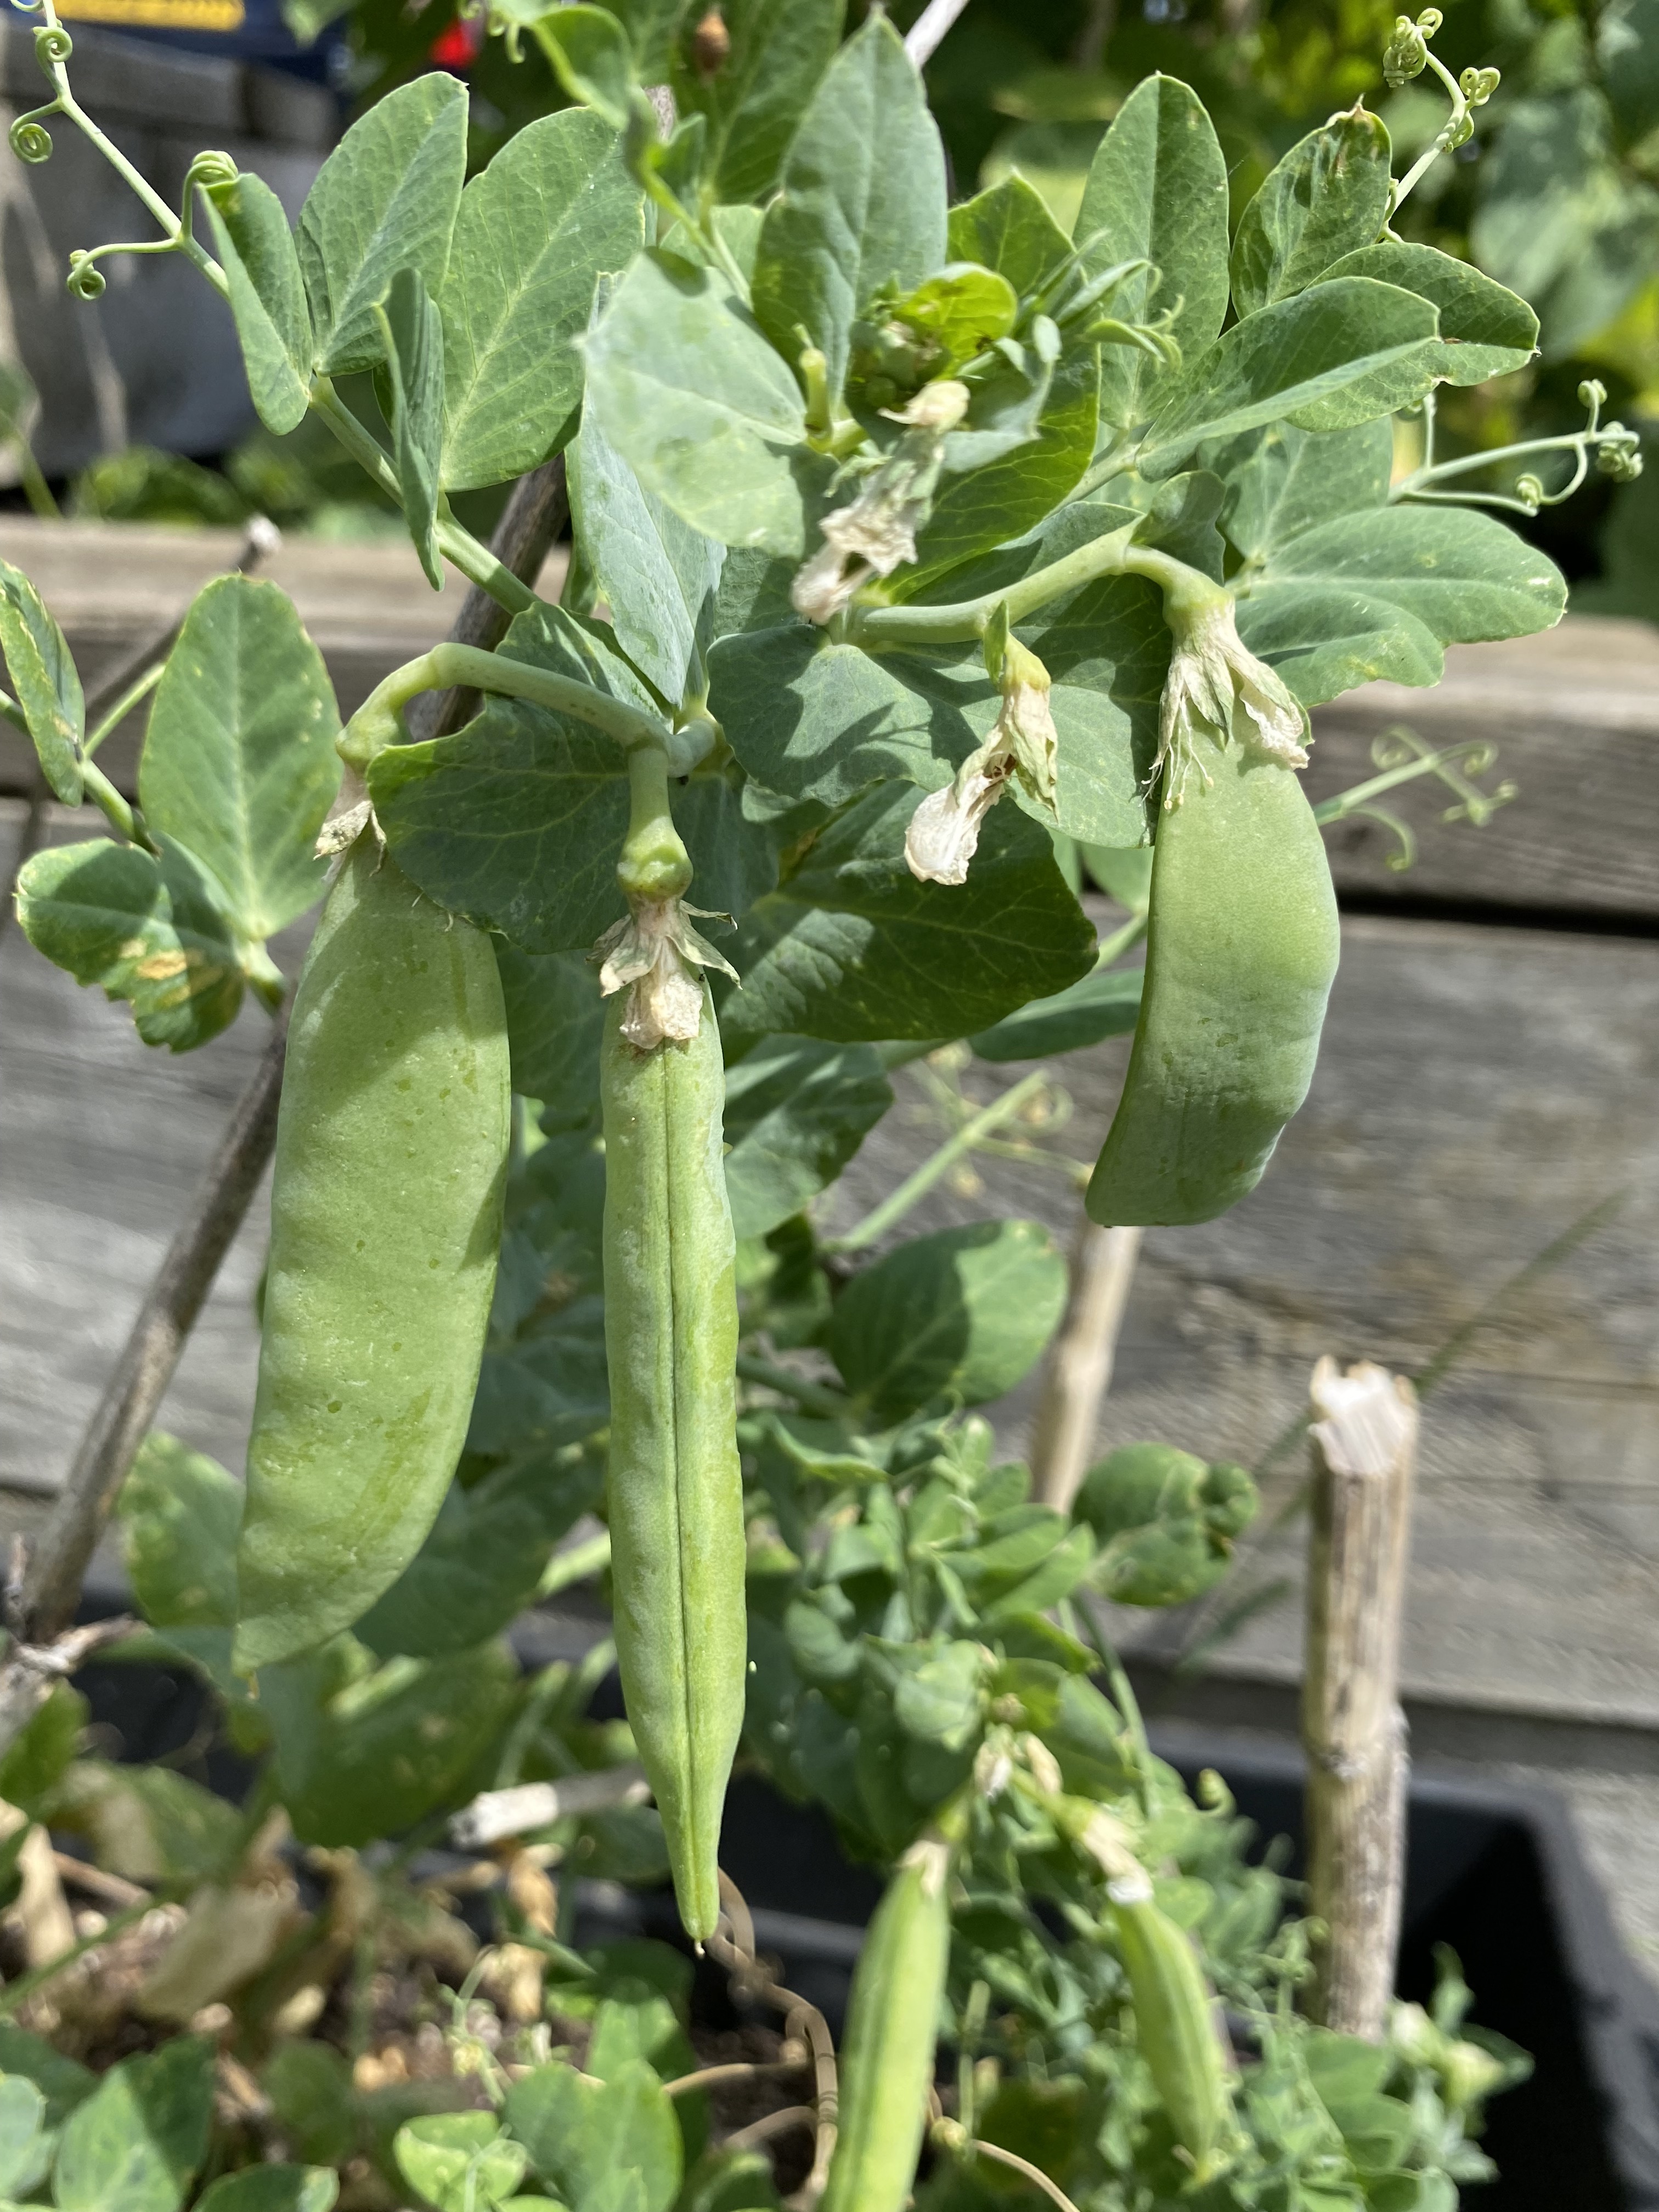 Pea pods hanging from plant